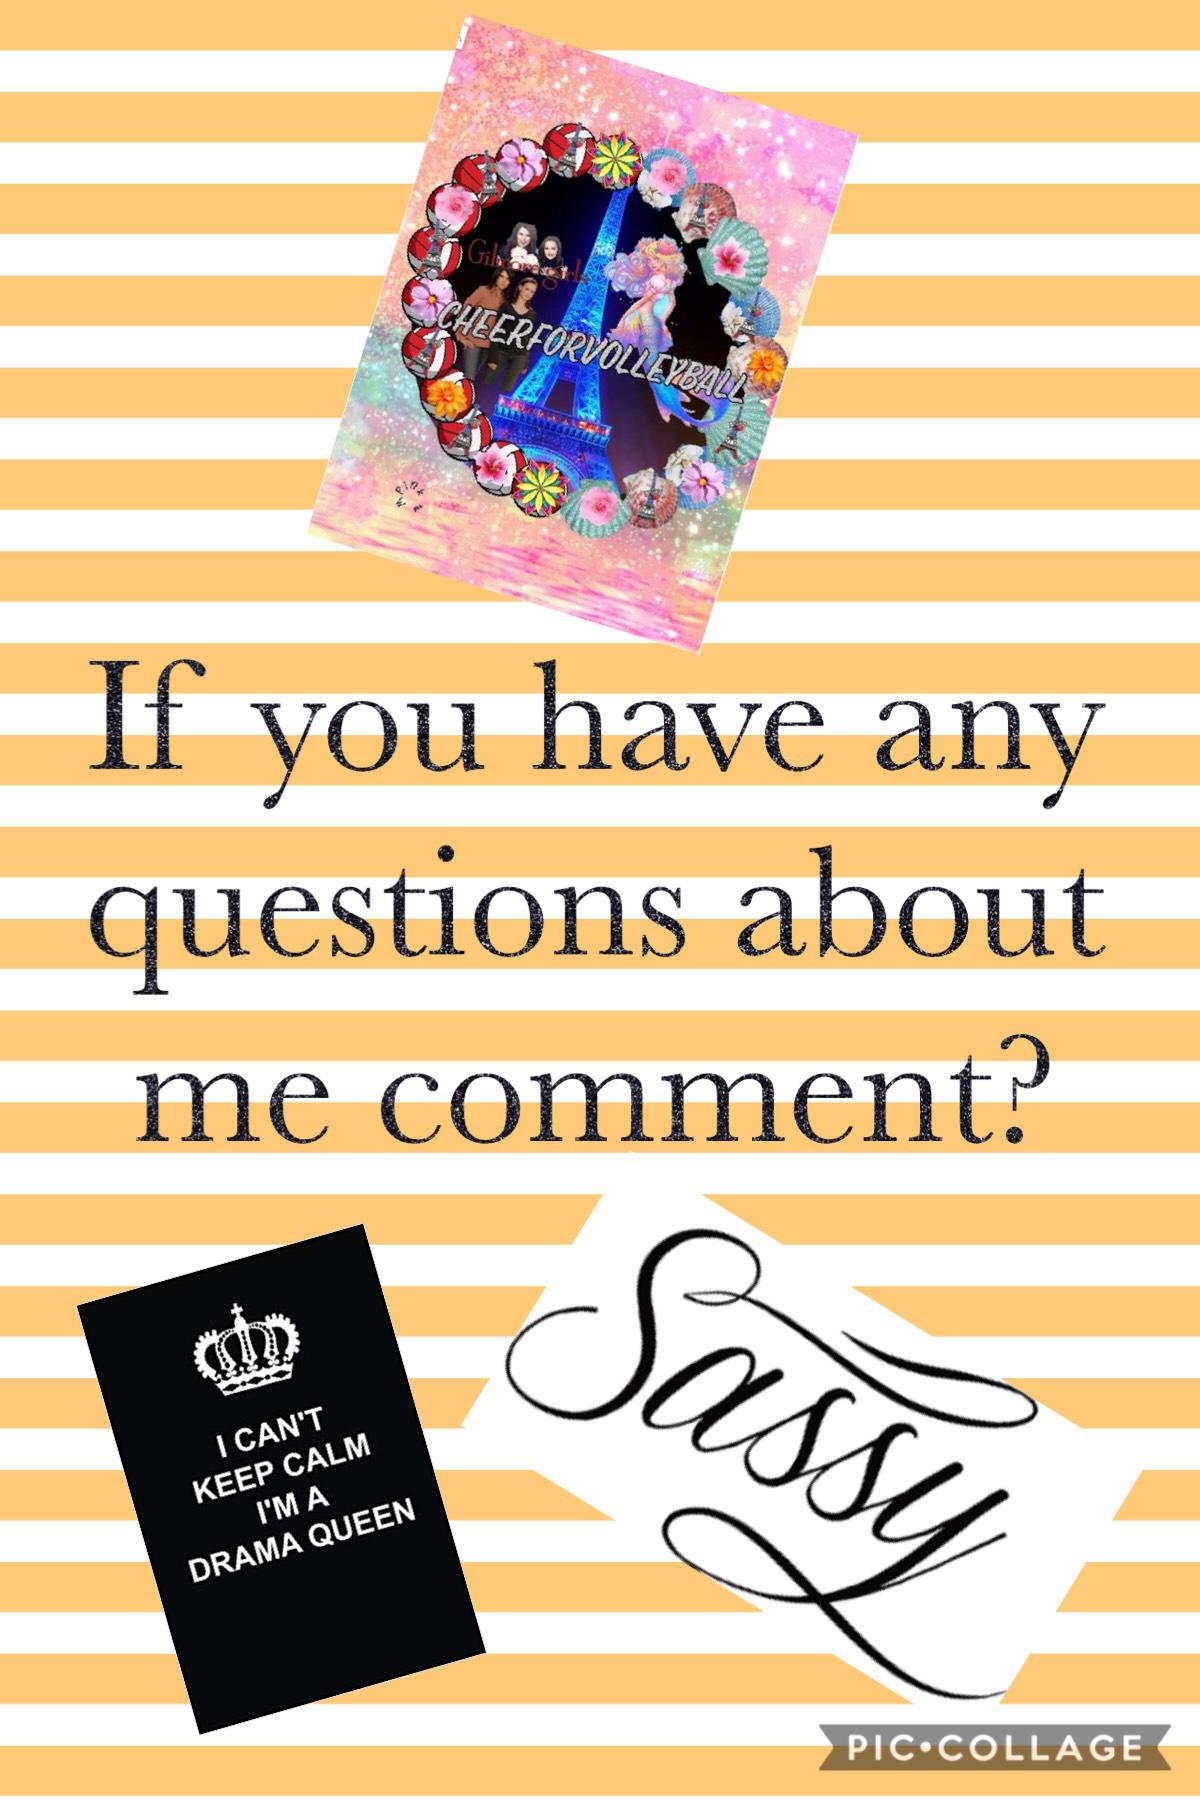 If you have any questions about me comment.